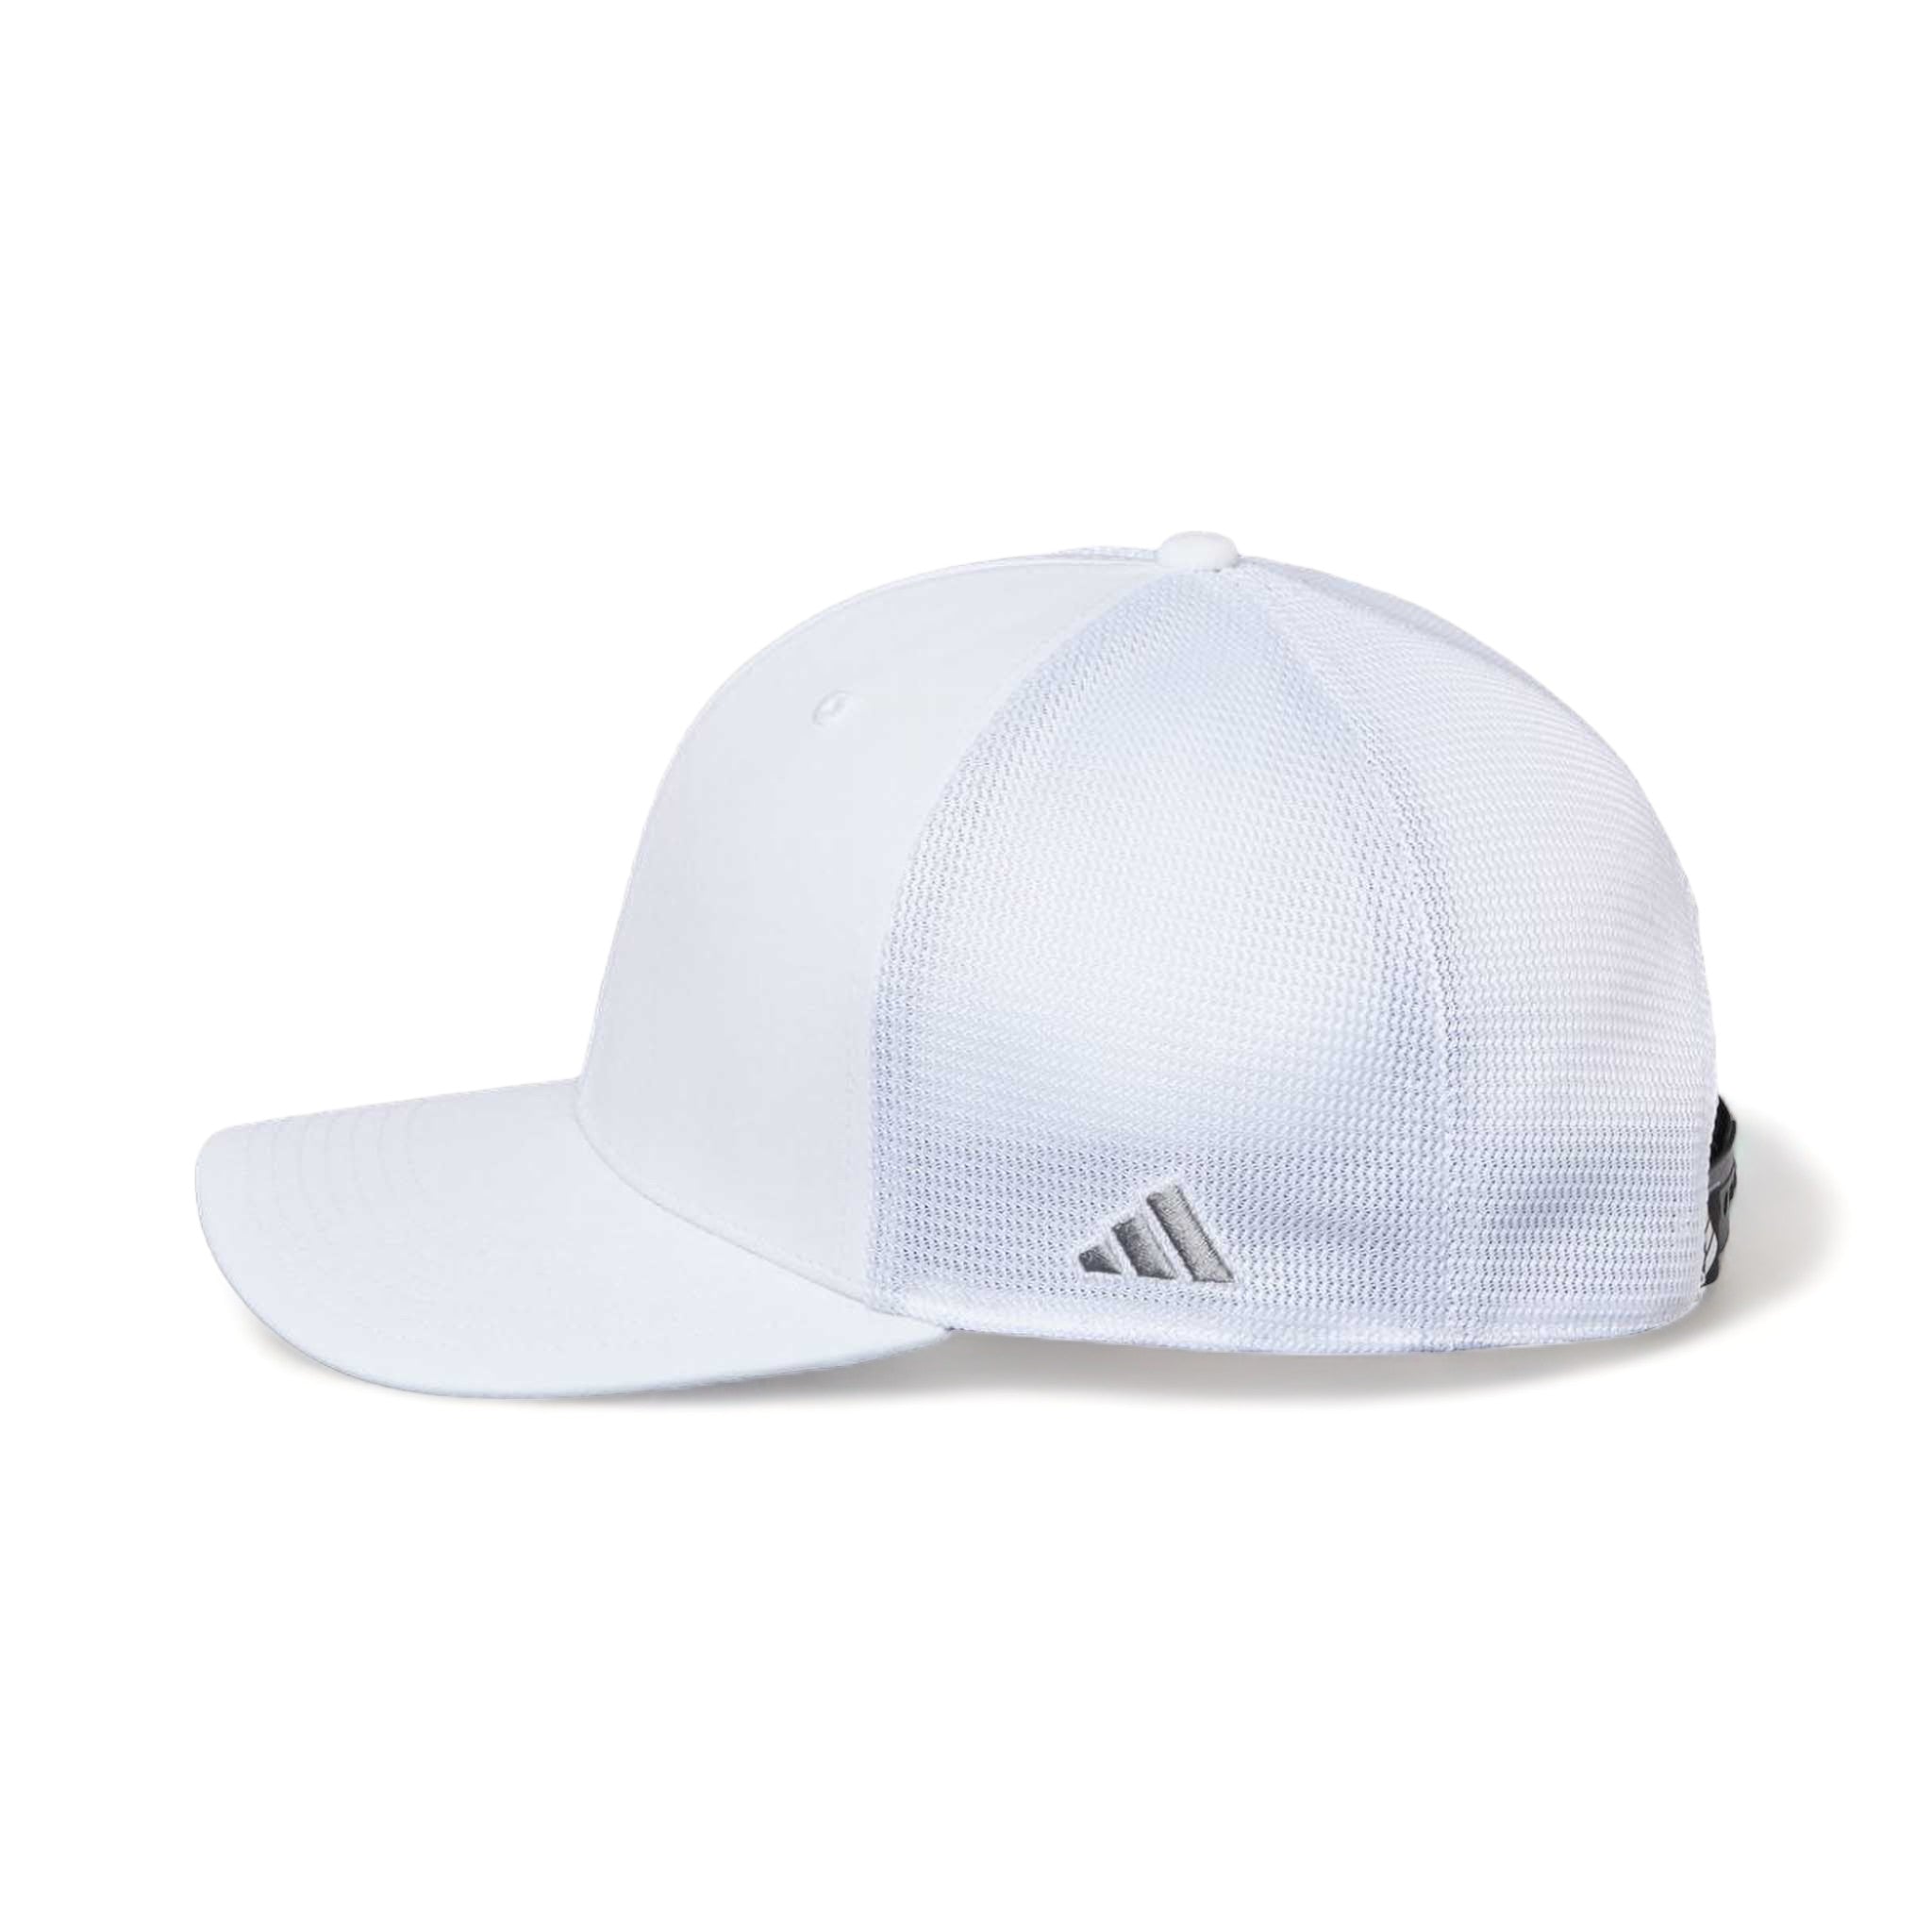 Side view of Adidas A627S custom hat in white